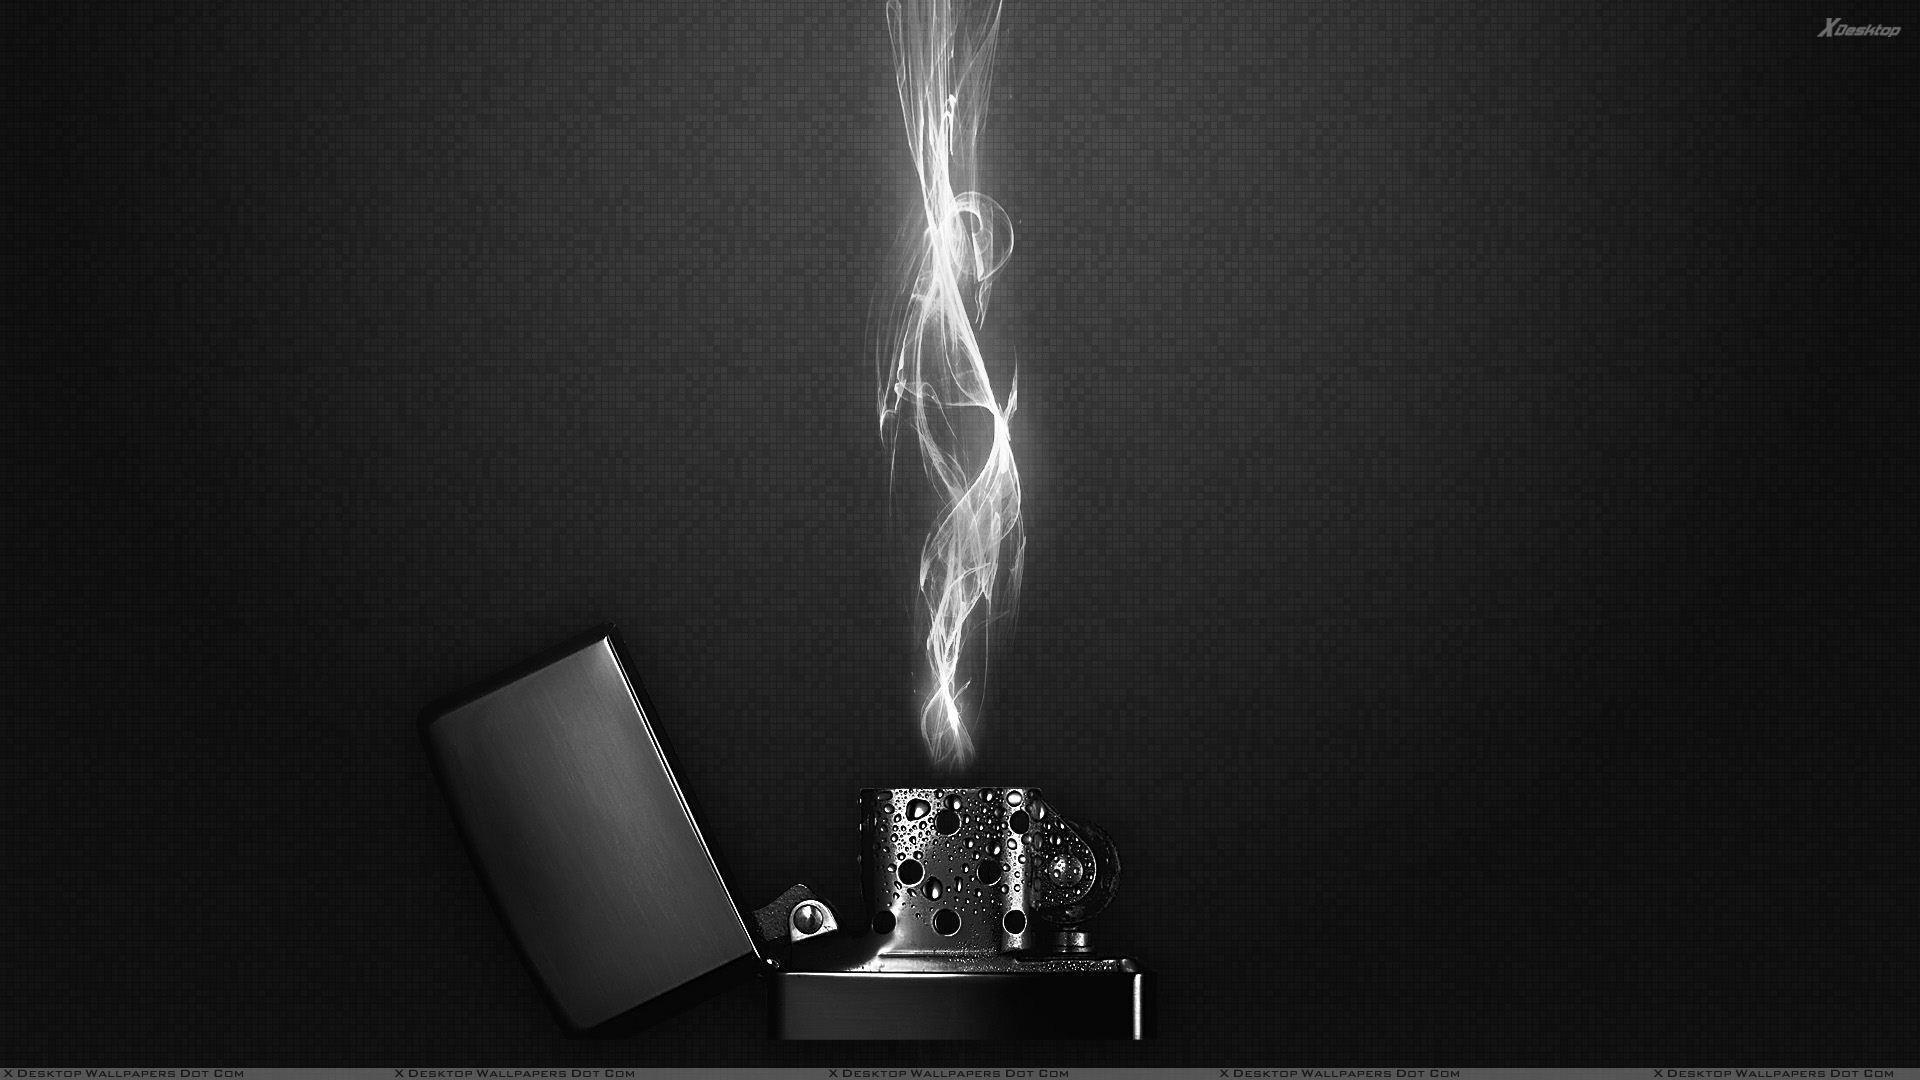 Lighter With Black And White Flames Wallpaper